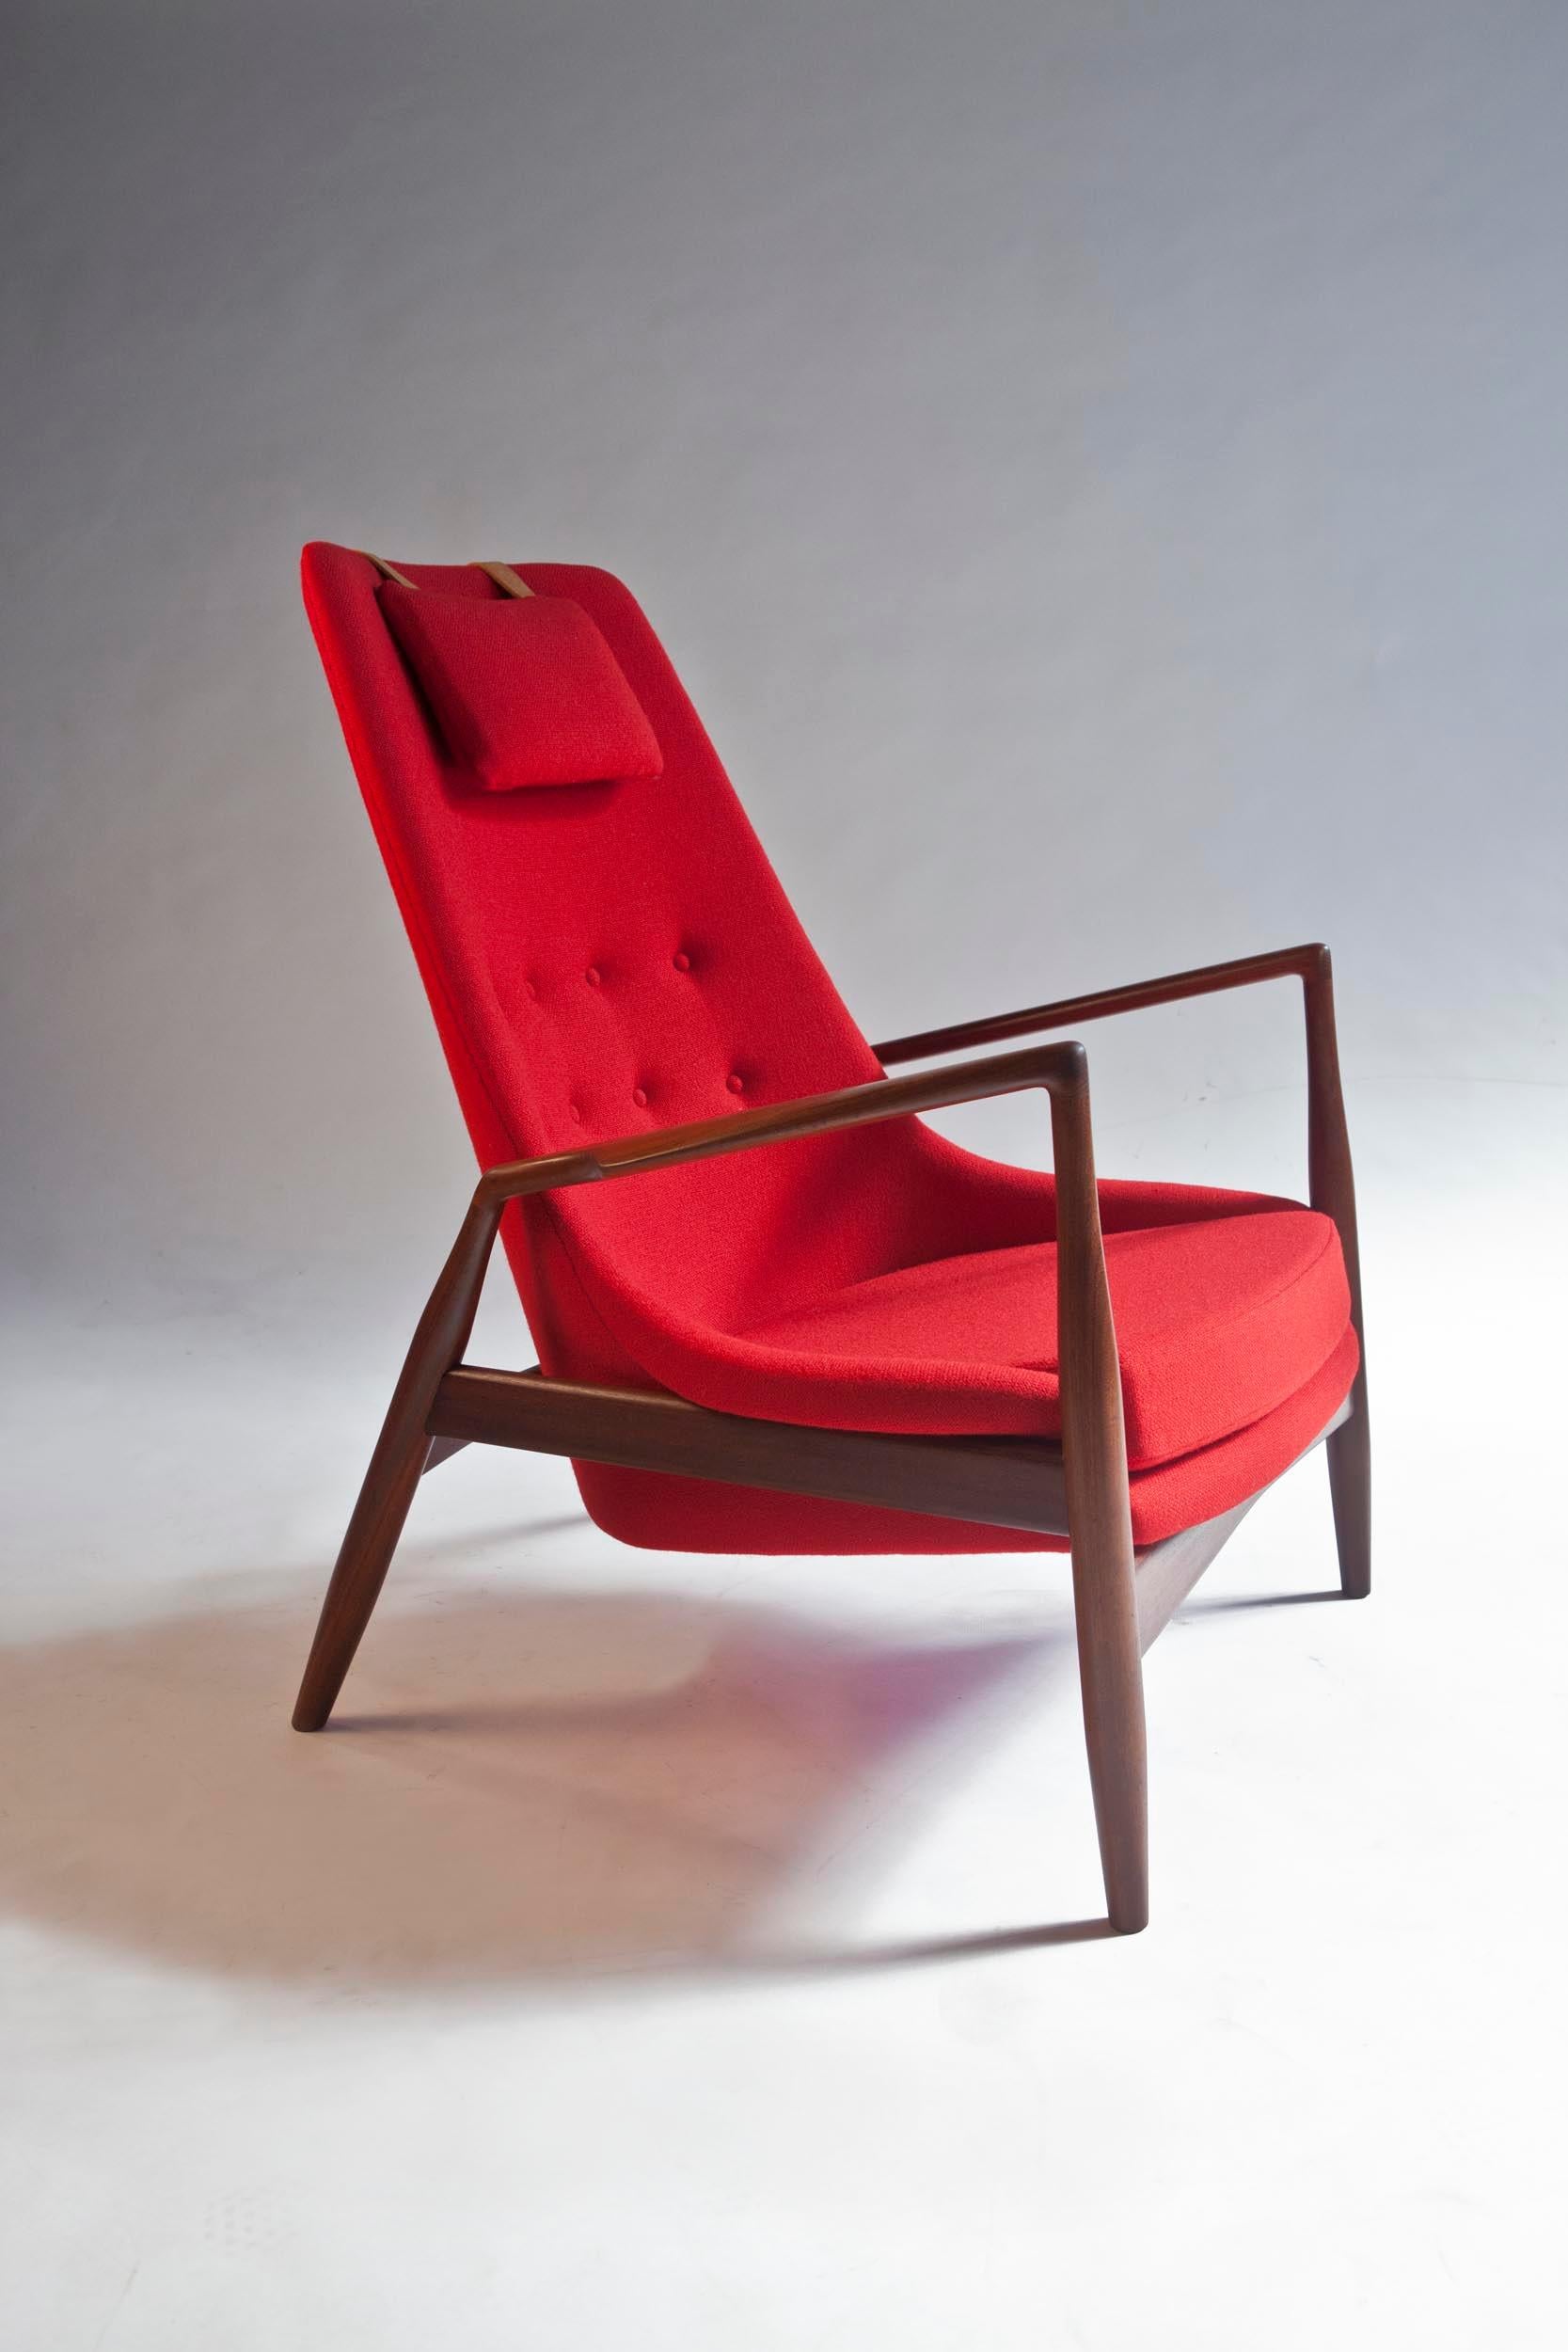 Ib Kofod-Larsen High Back Seal Chair in Afrormosia Teak for OPE, Sweden, 1960s For Sale 2